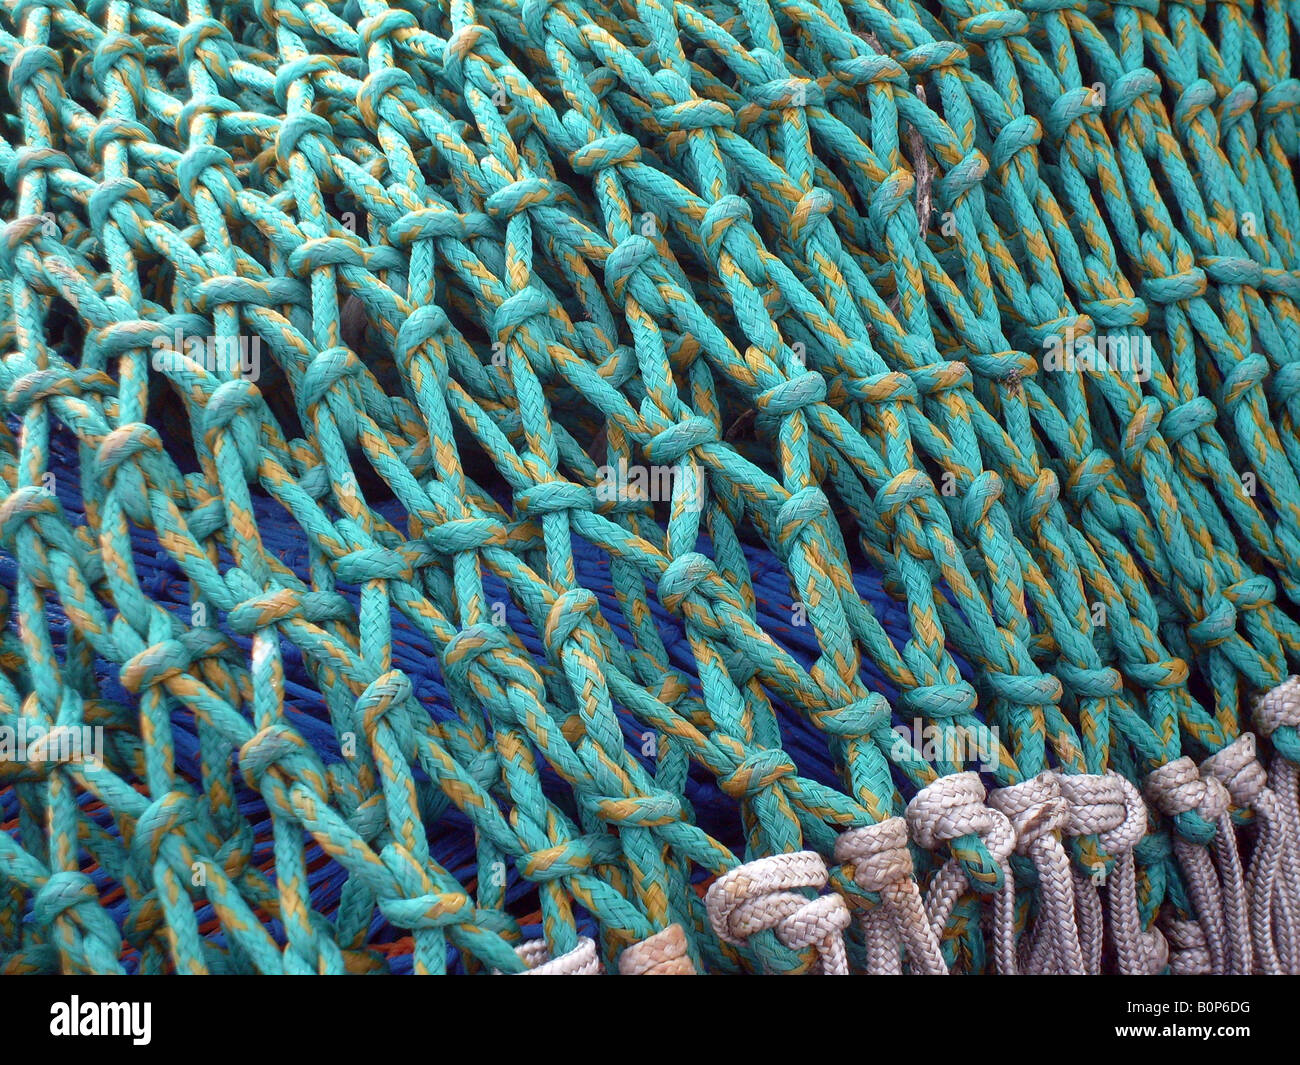 Close up of fishing nets on trawler boat, showing details. Stock Photo